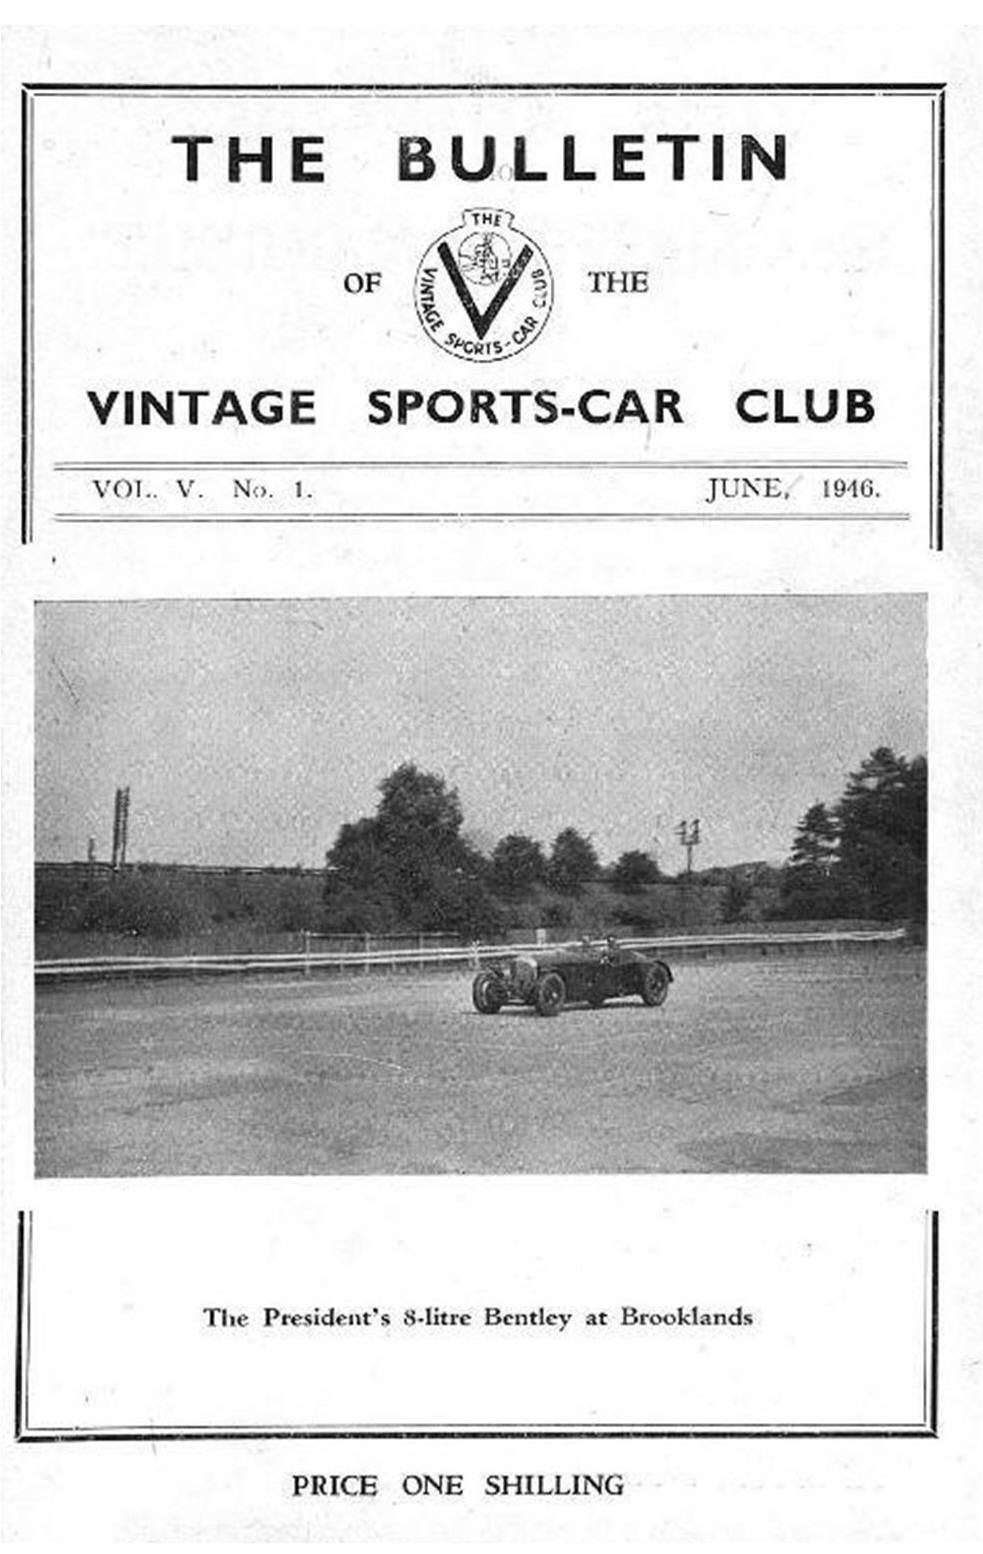 Bagshot-The Opening Rally Sept. 1945. Elstree Speed Trials. Pomeroy Trophy cover